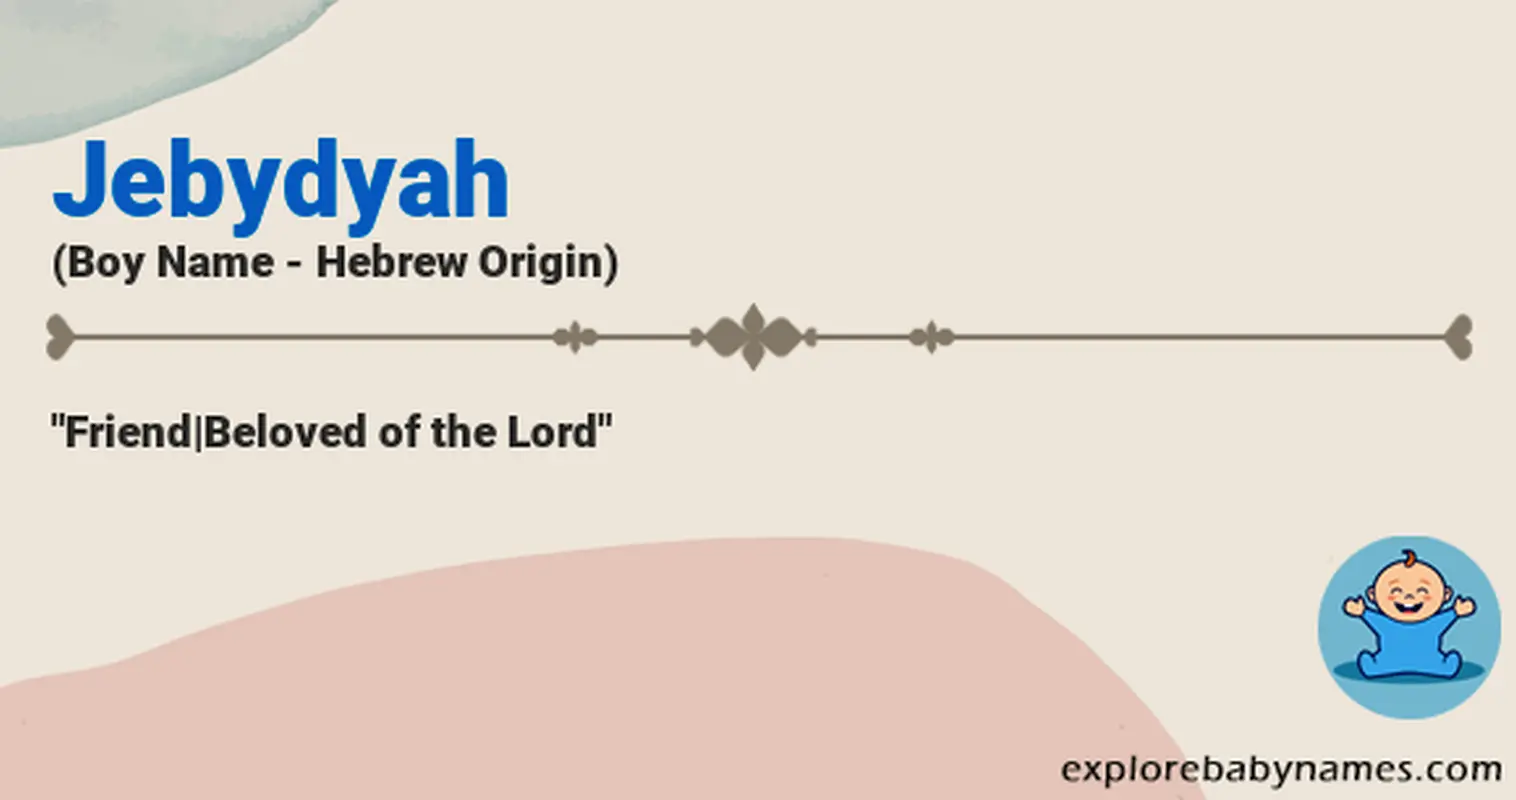 Meaning of Jebydyah